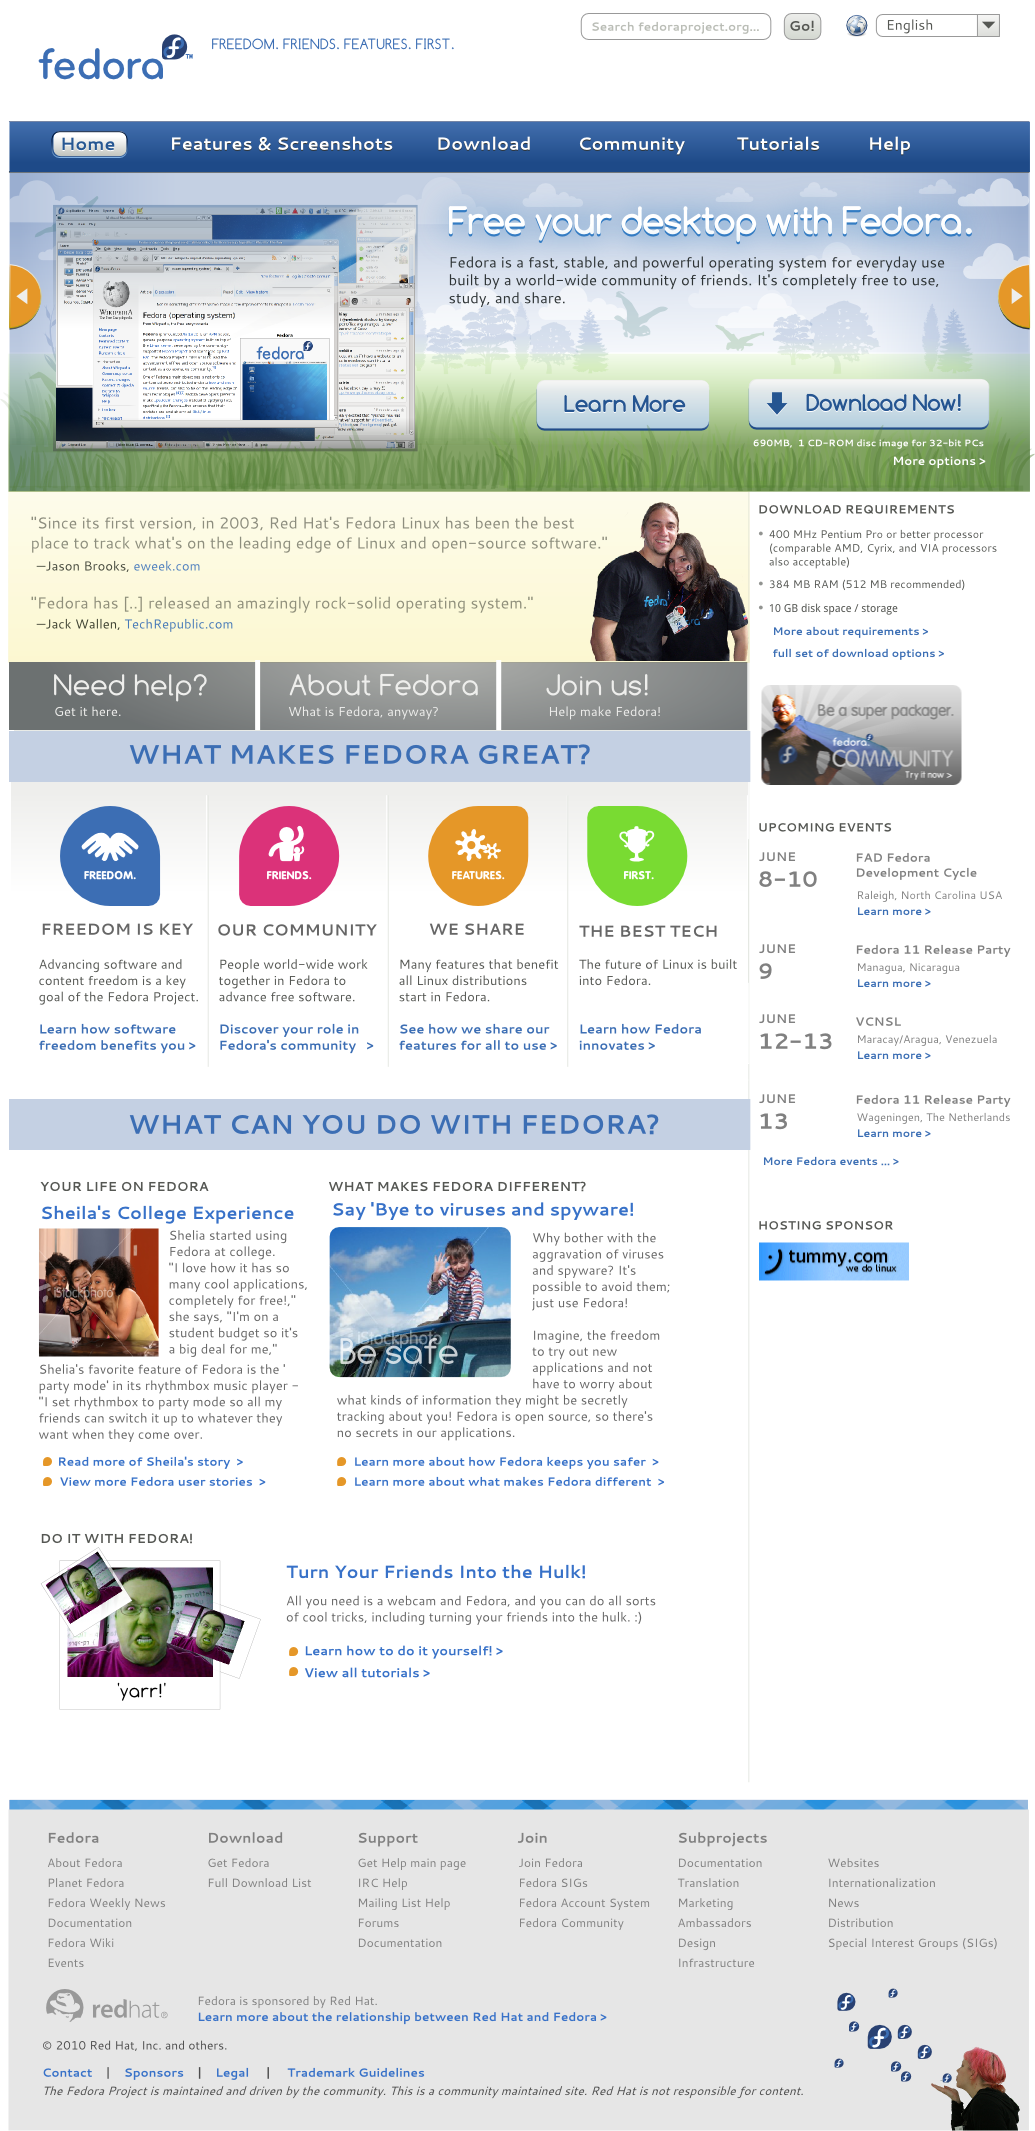 Wwwfpo-redesign-2010_1b-frontpage.png